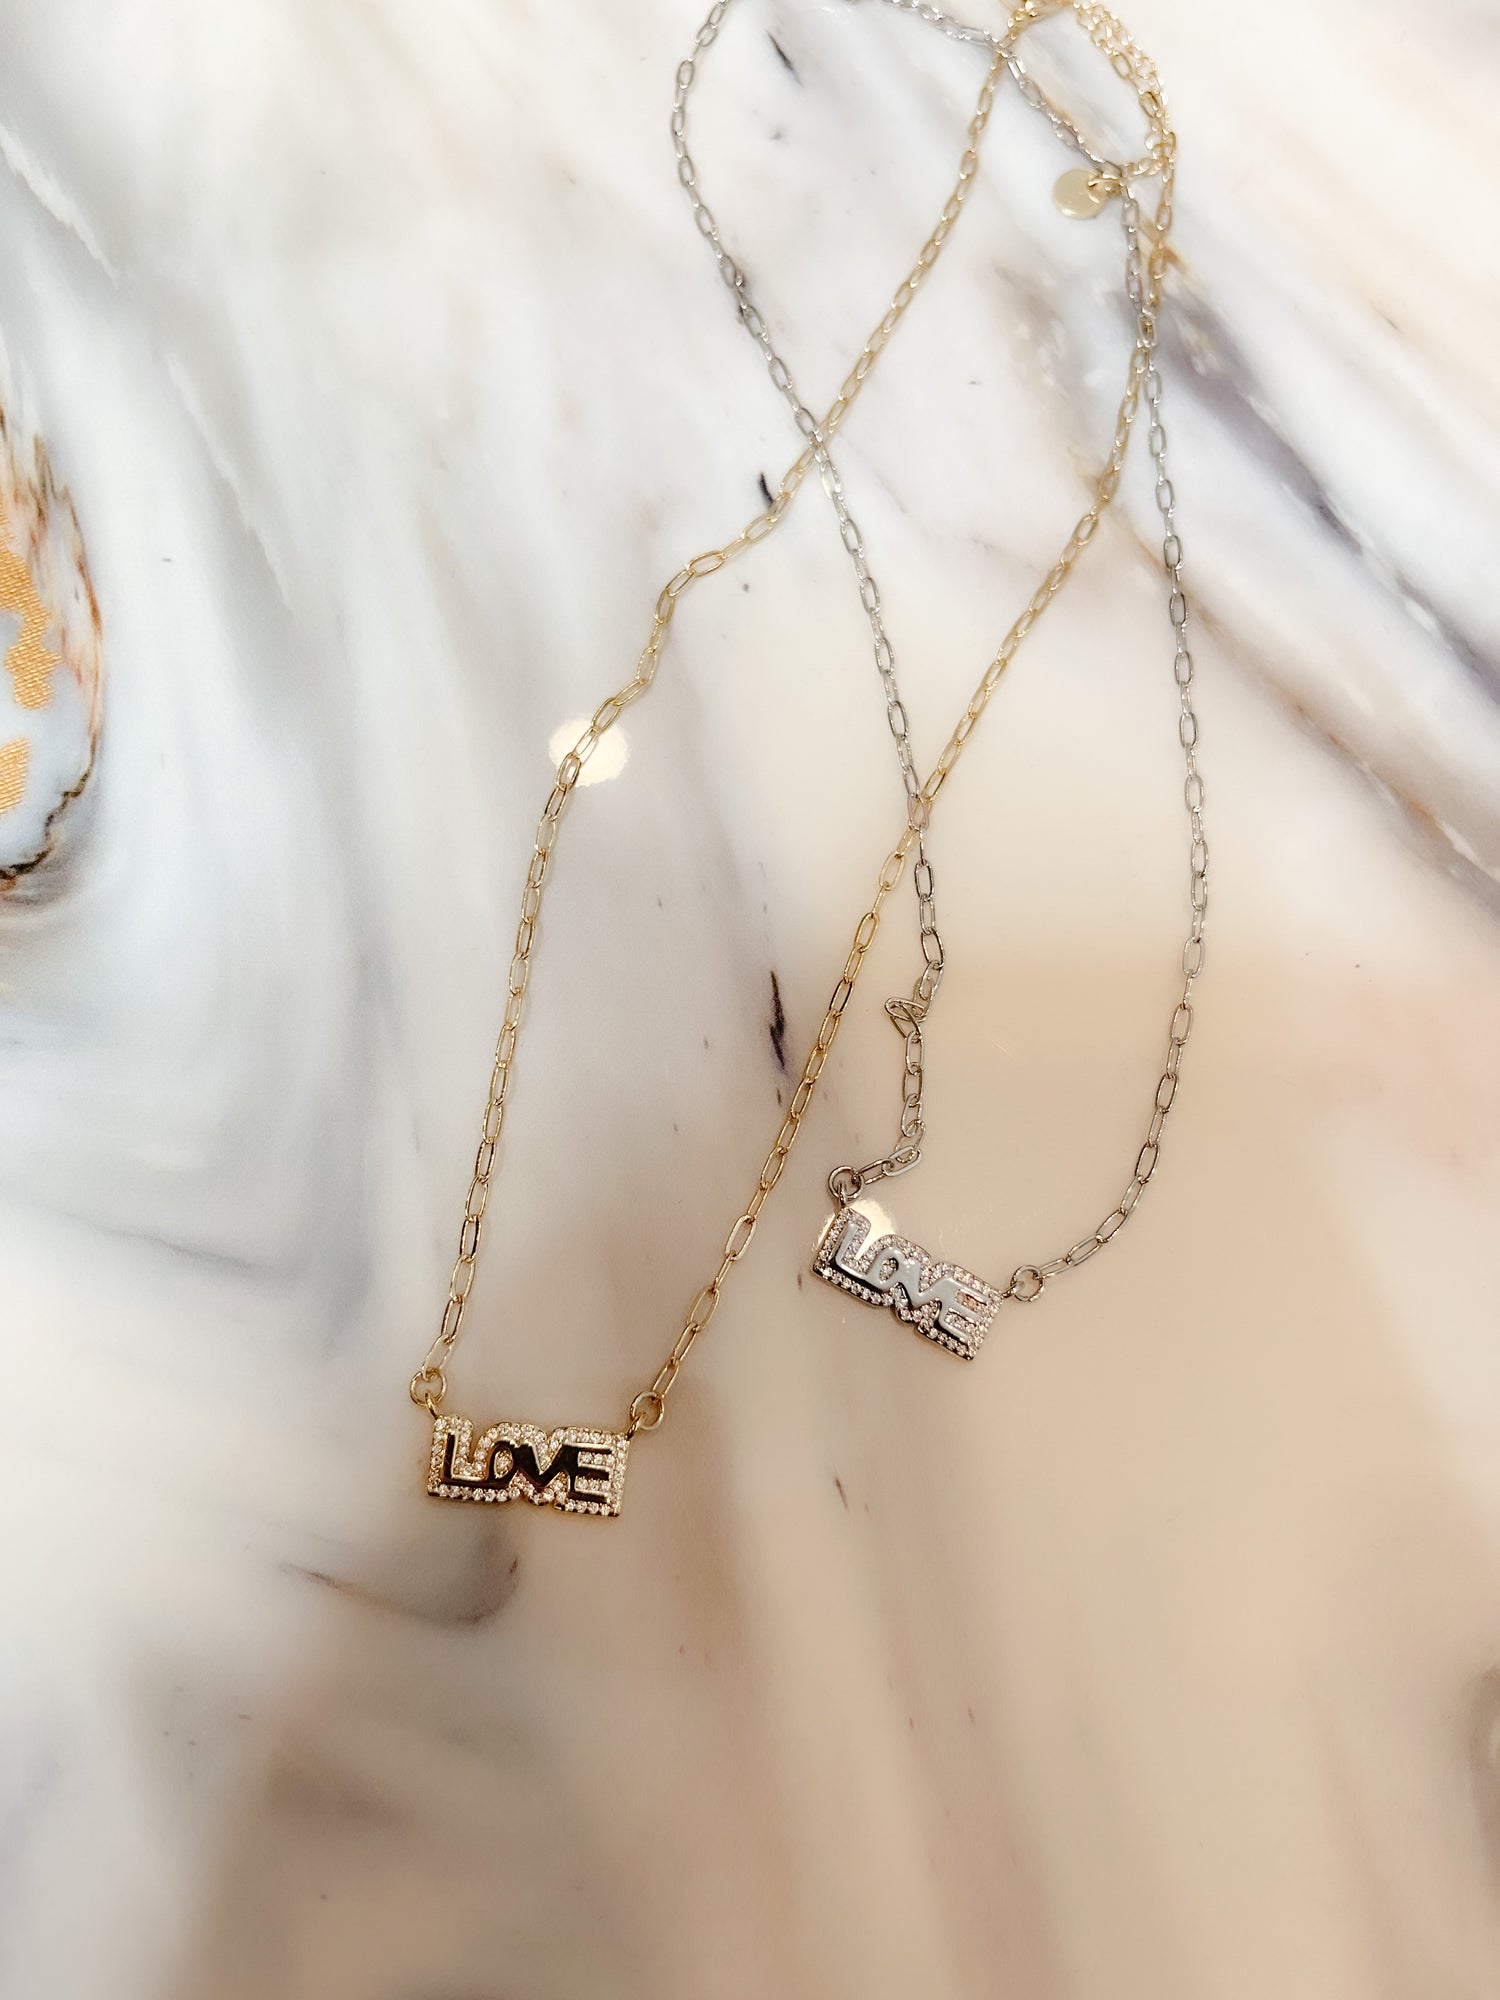 Love Necklace by Treasure Jewels